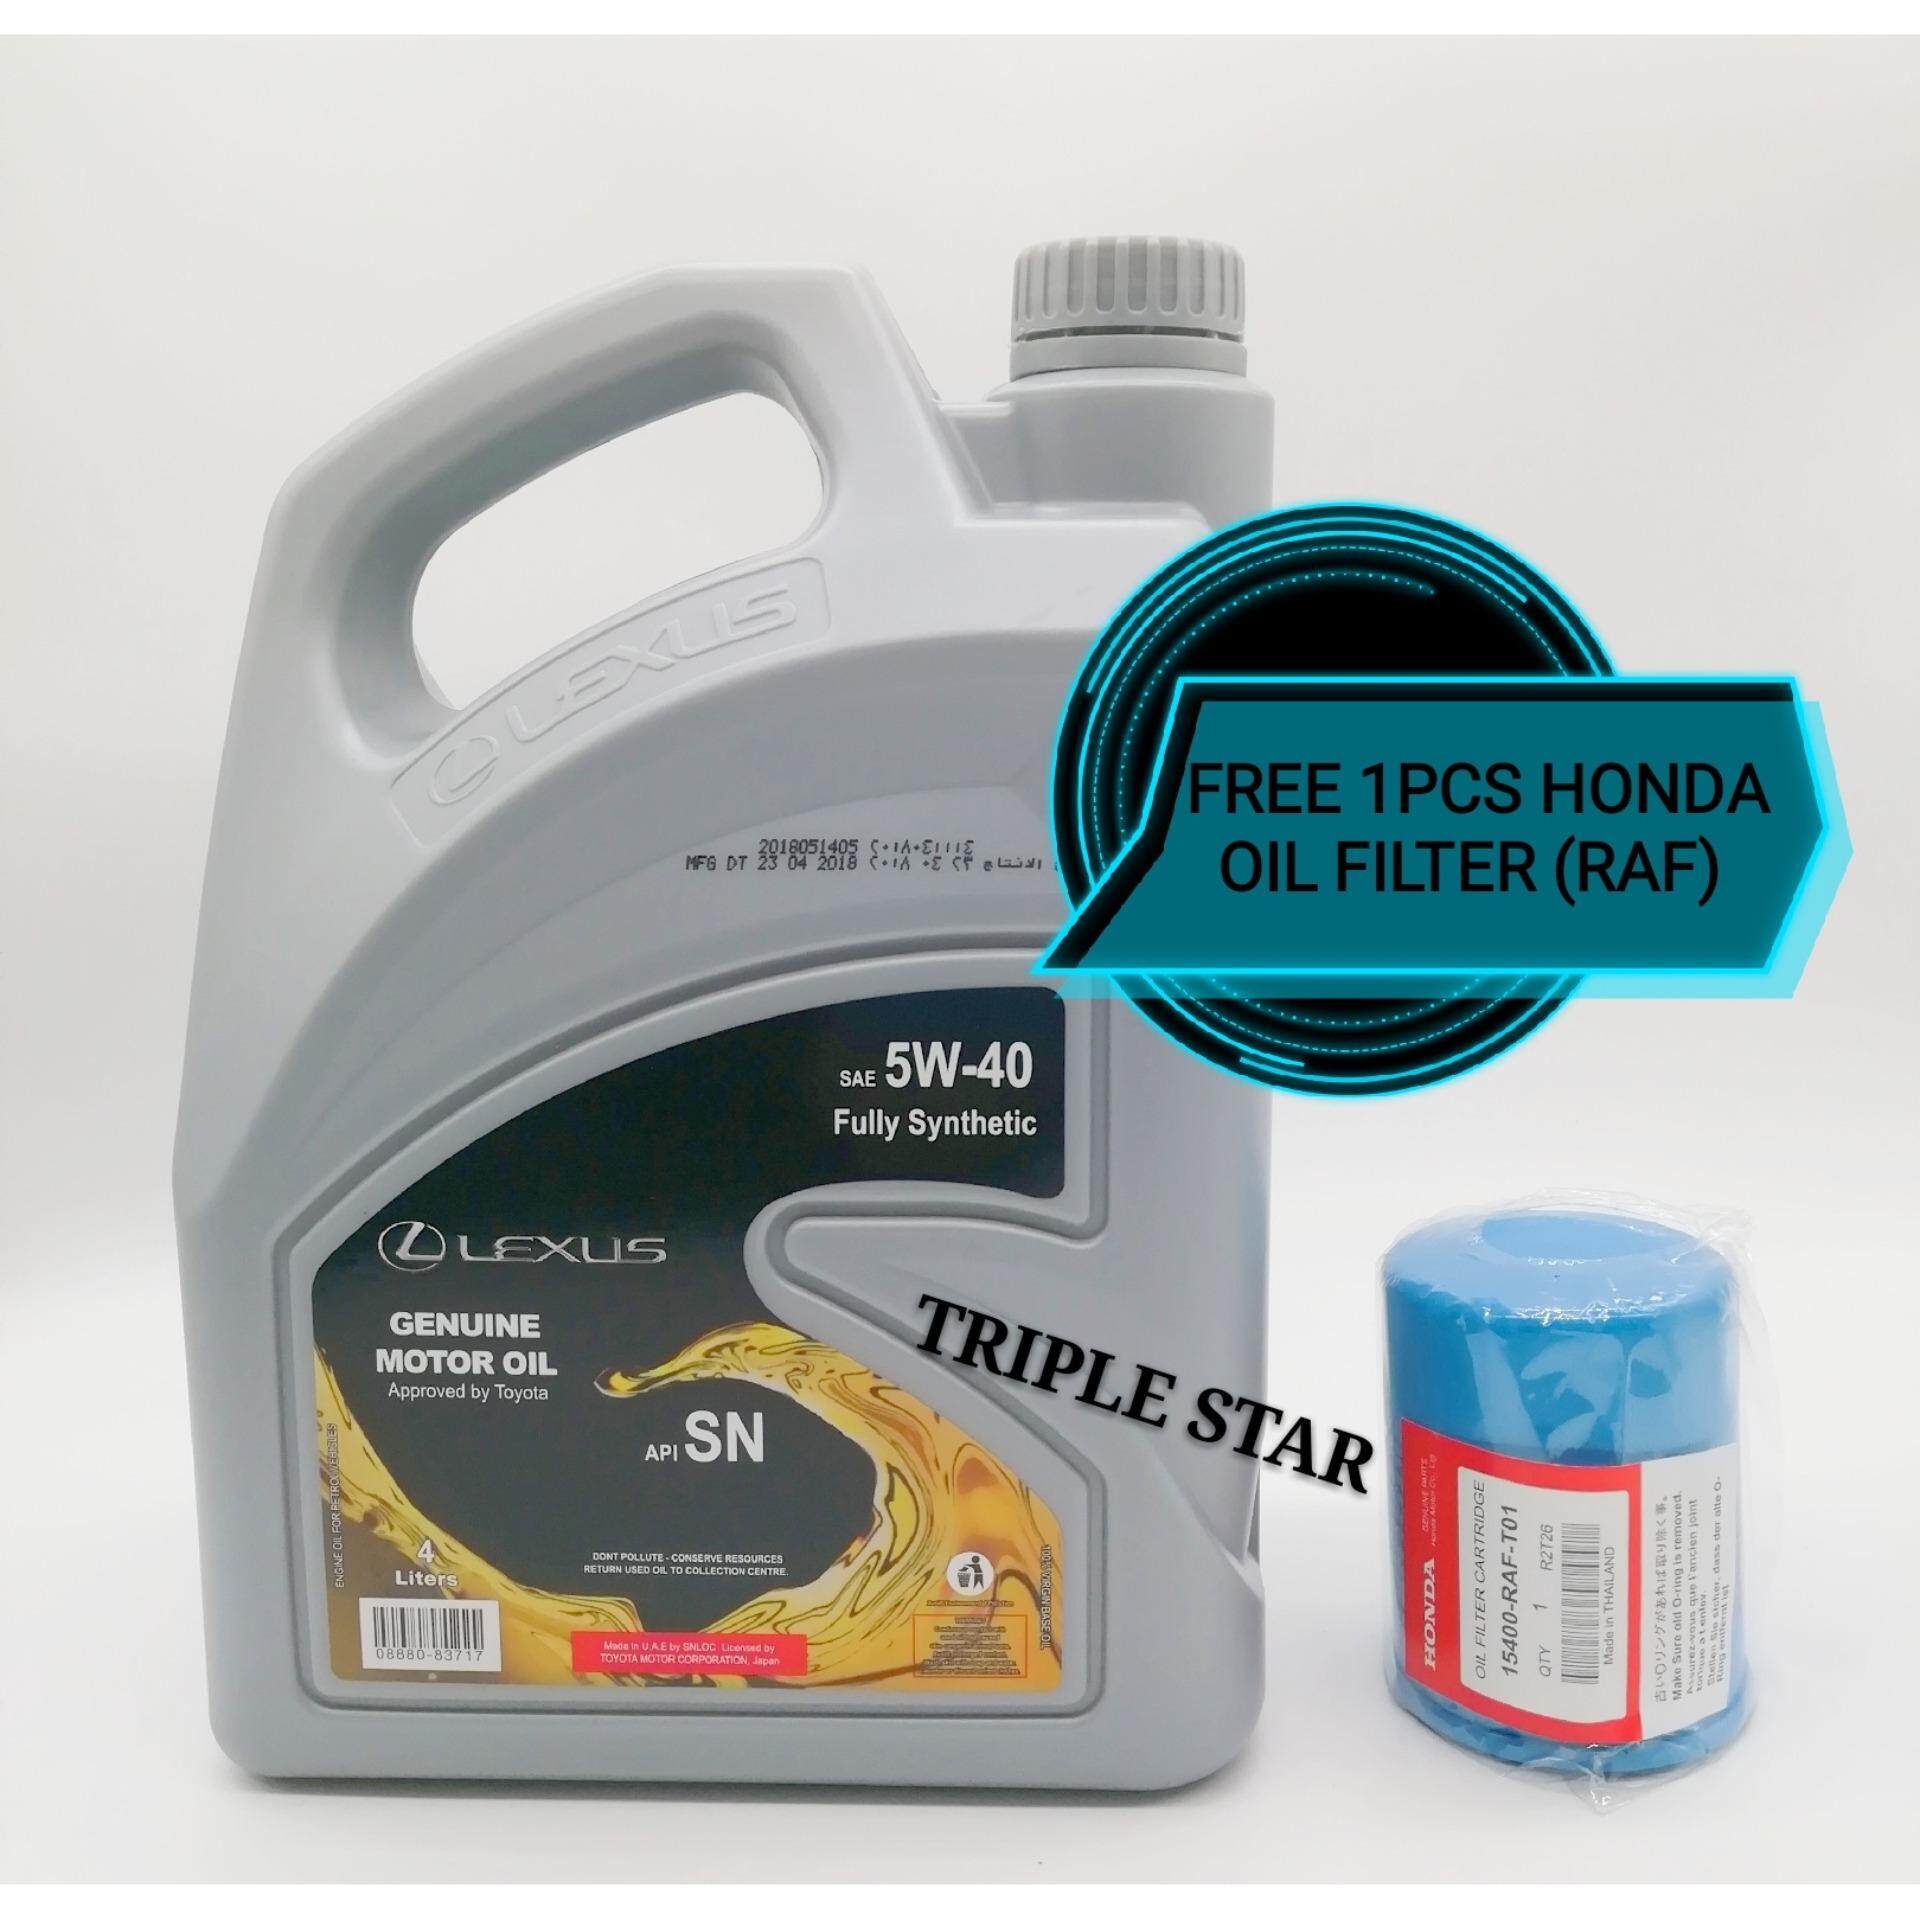 LEXUS FULLY SYNTETIC 5W40 ENGINE OIL With Honda Oil Filter